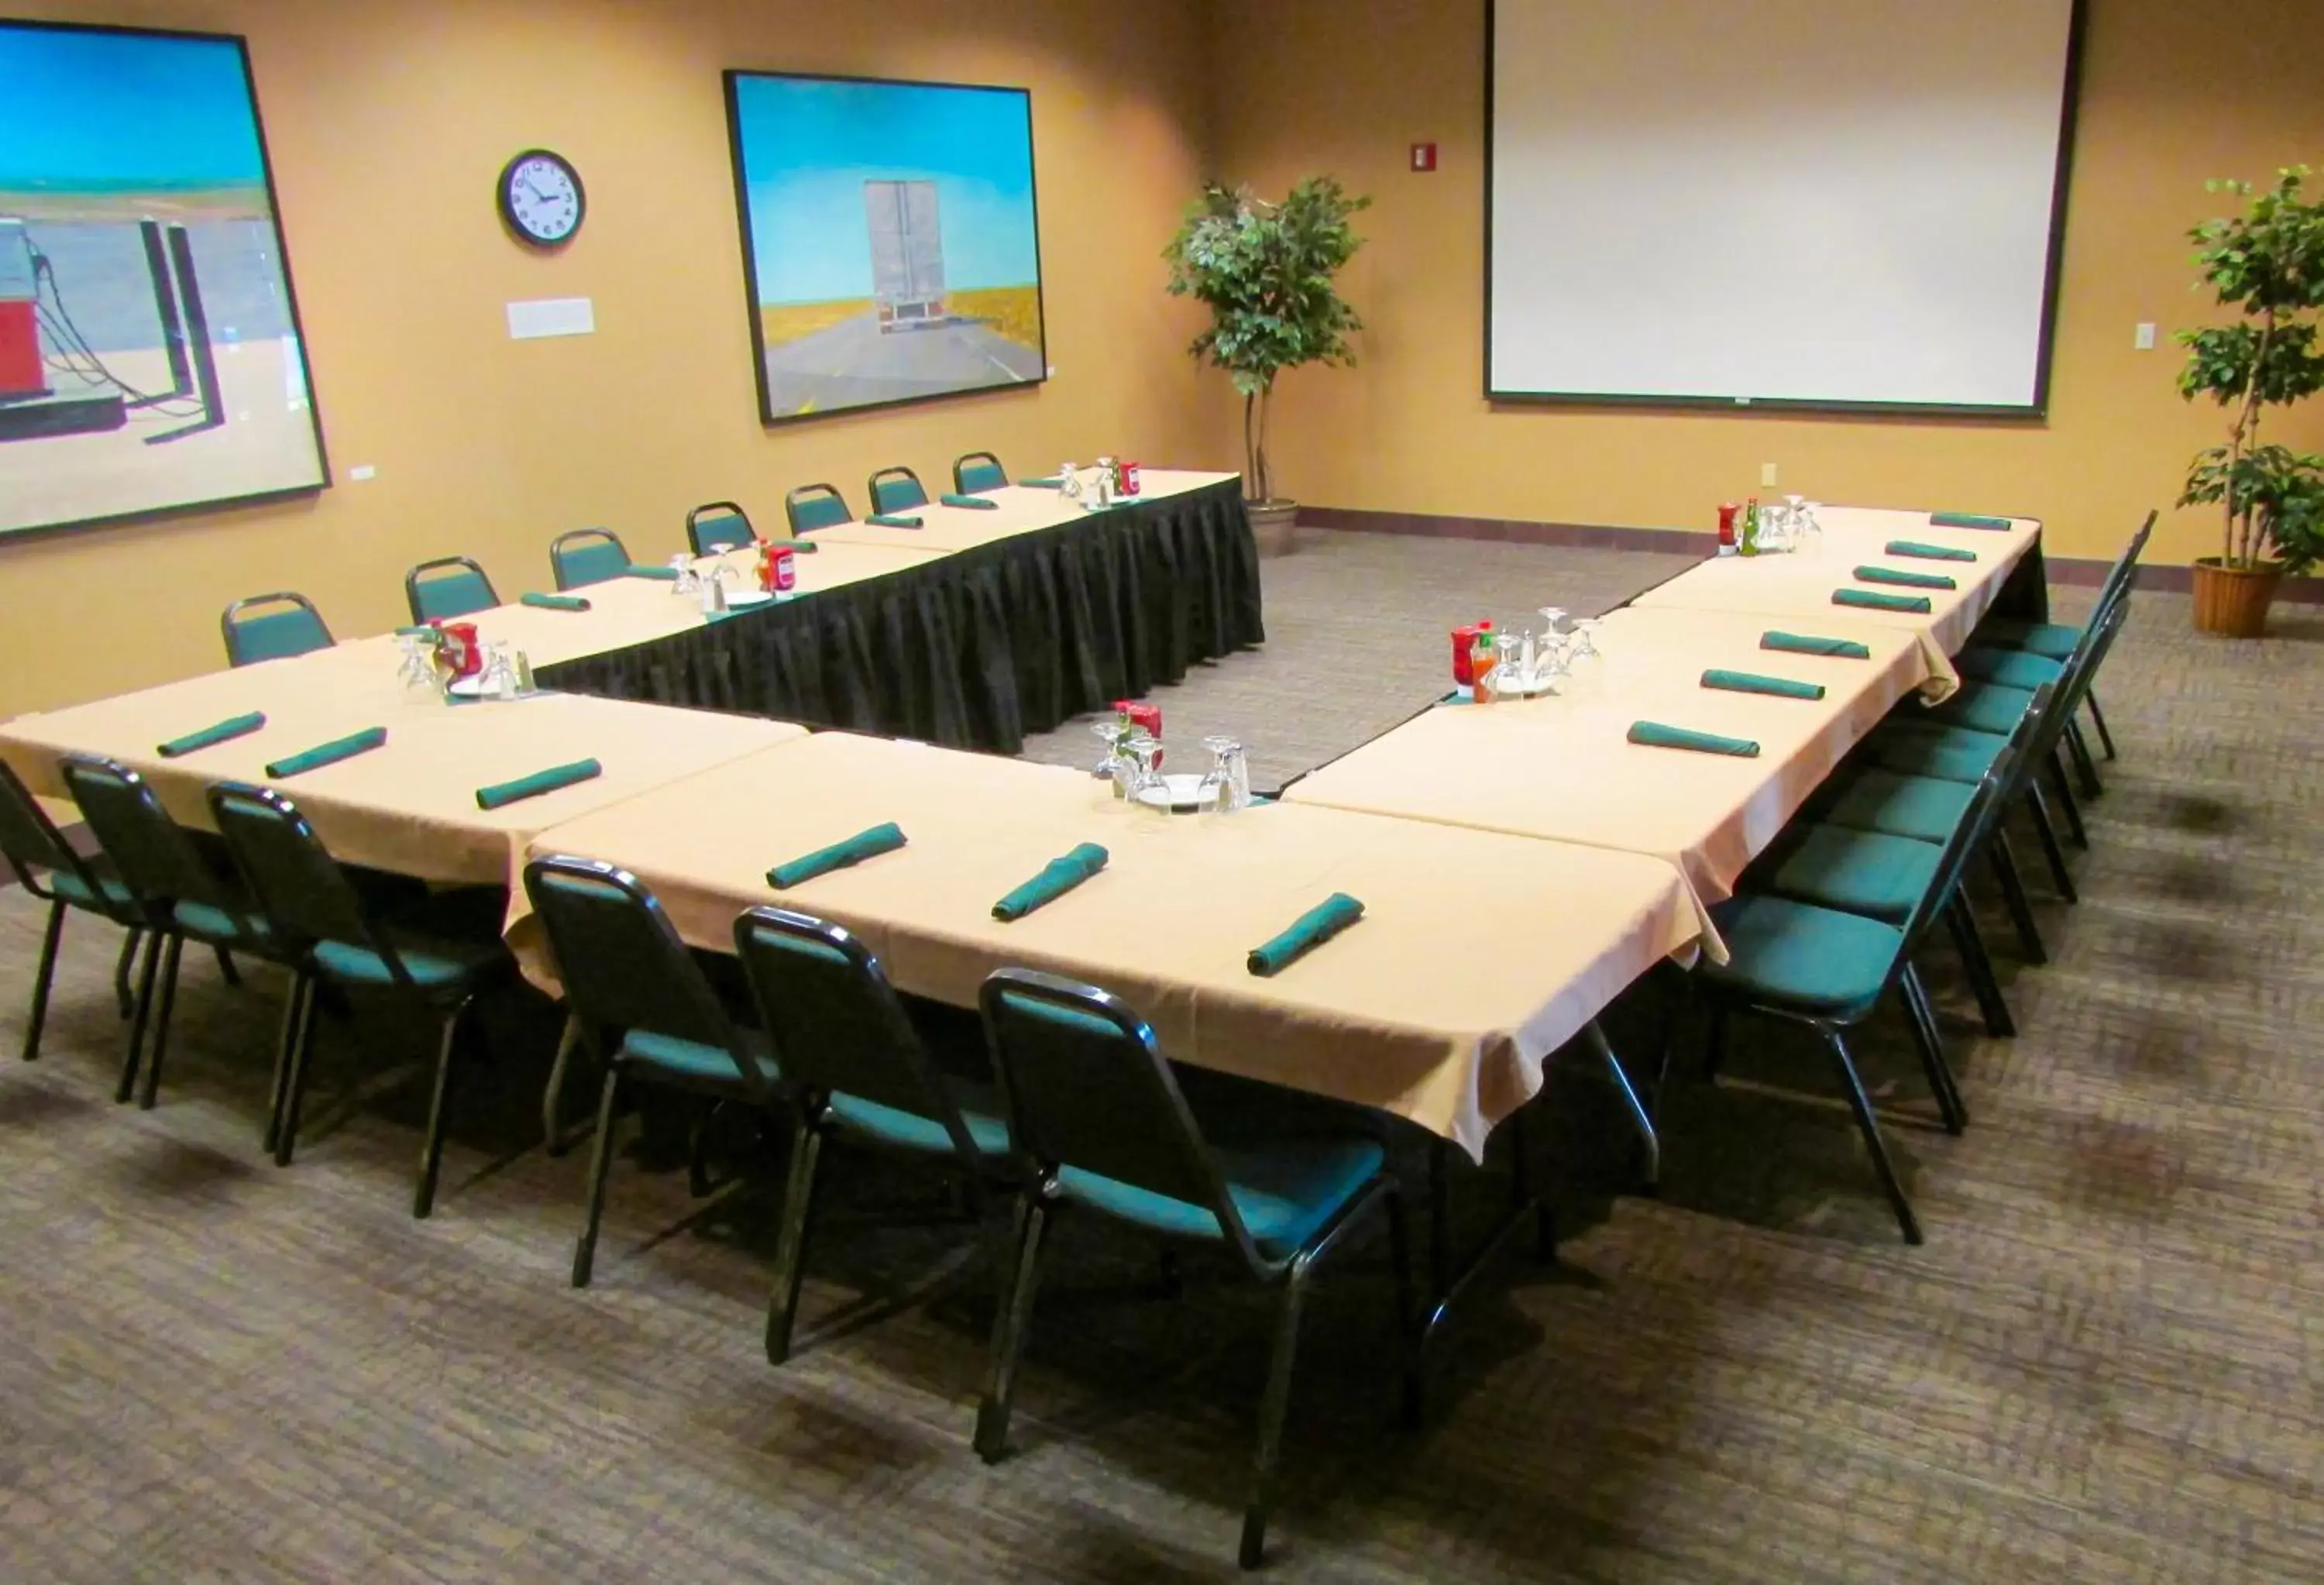 Business facilities in The Portlander Inn and Marketplace